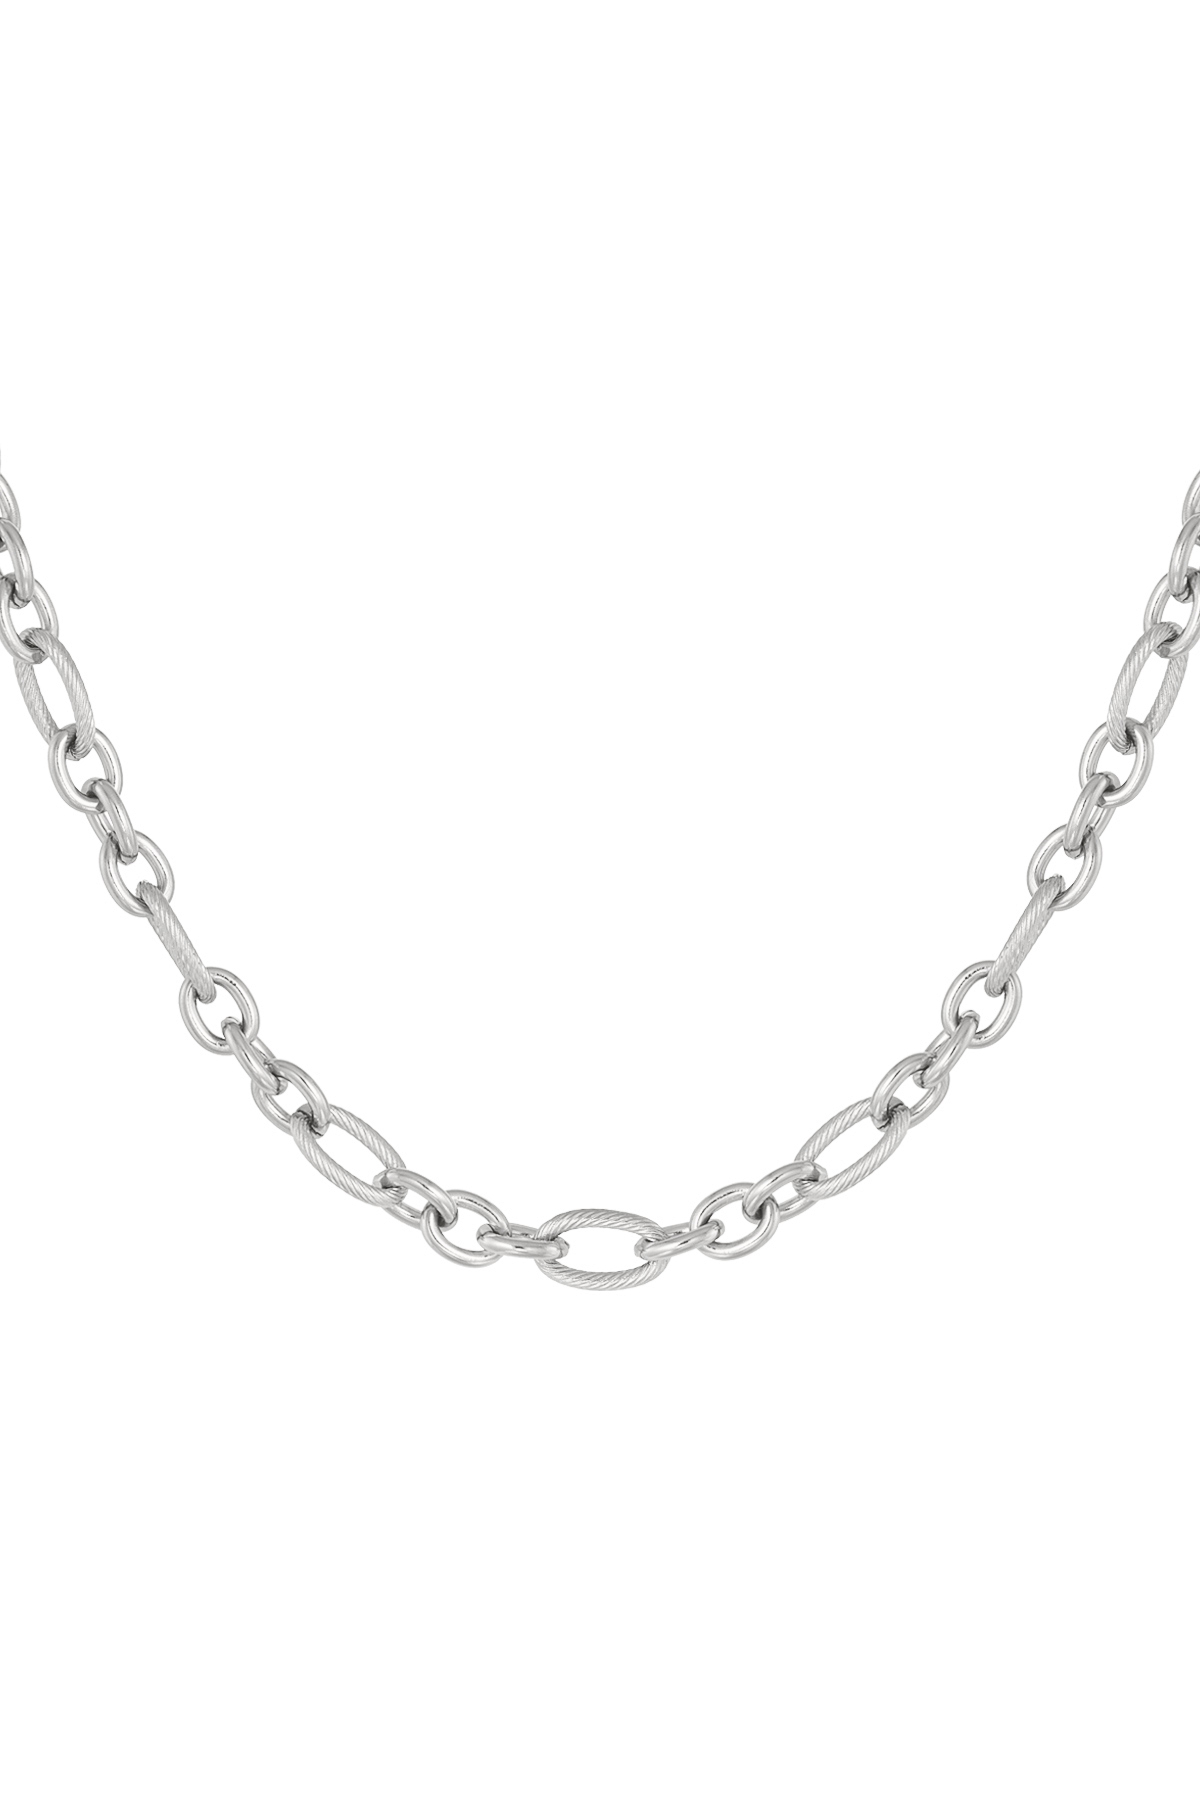 Link chain small and large links - silver